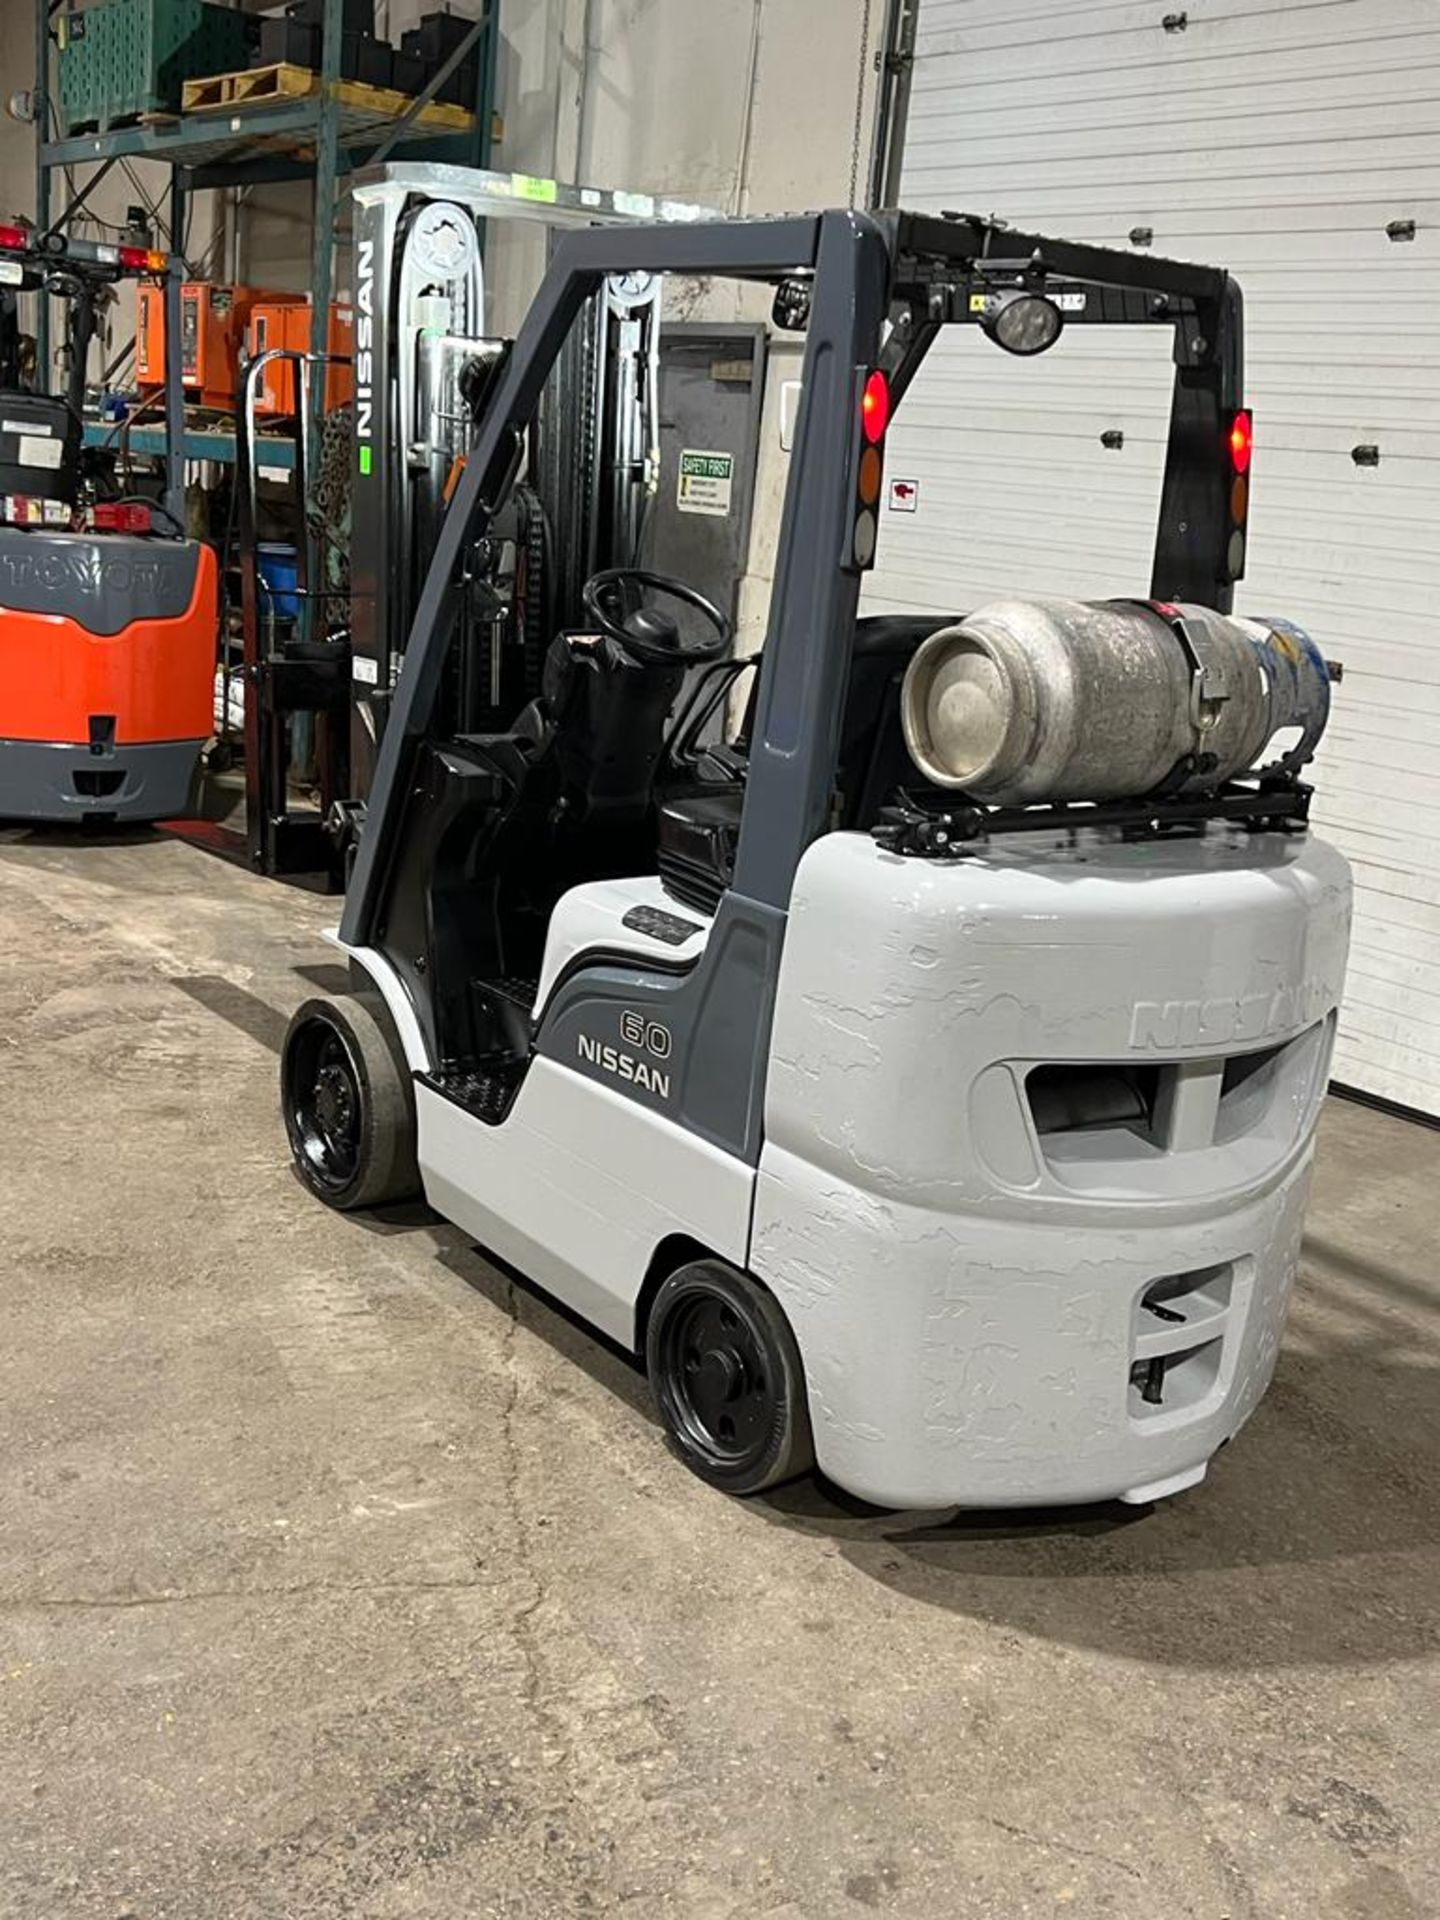 2013 Nissan 60 - 6,000lbs Capacity Forklift LPG (propane) with Sideshift & 3 stage mast with Low - Image 5 of 6